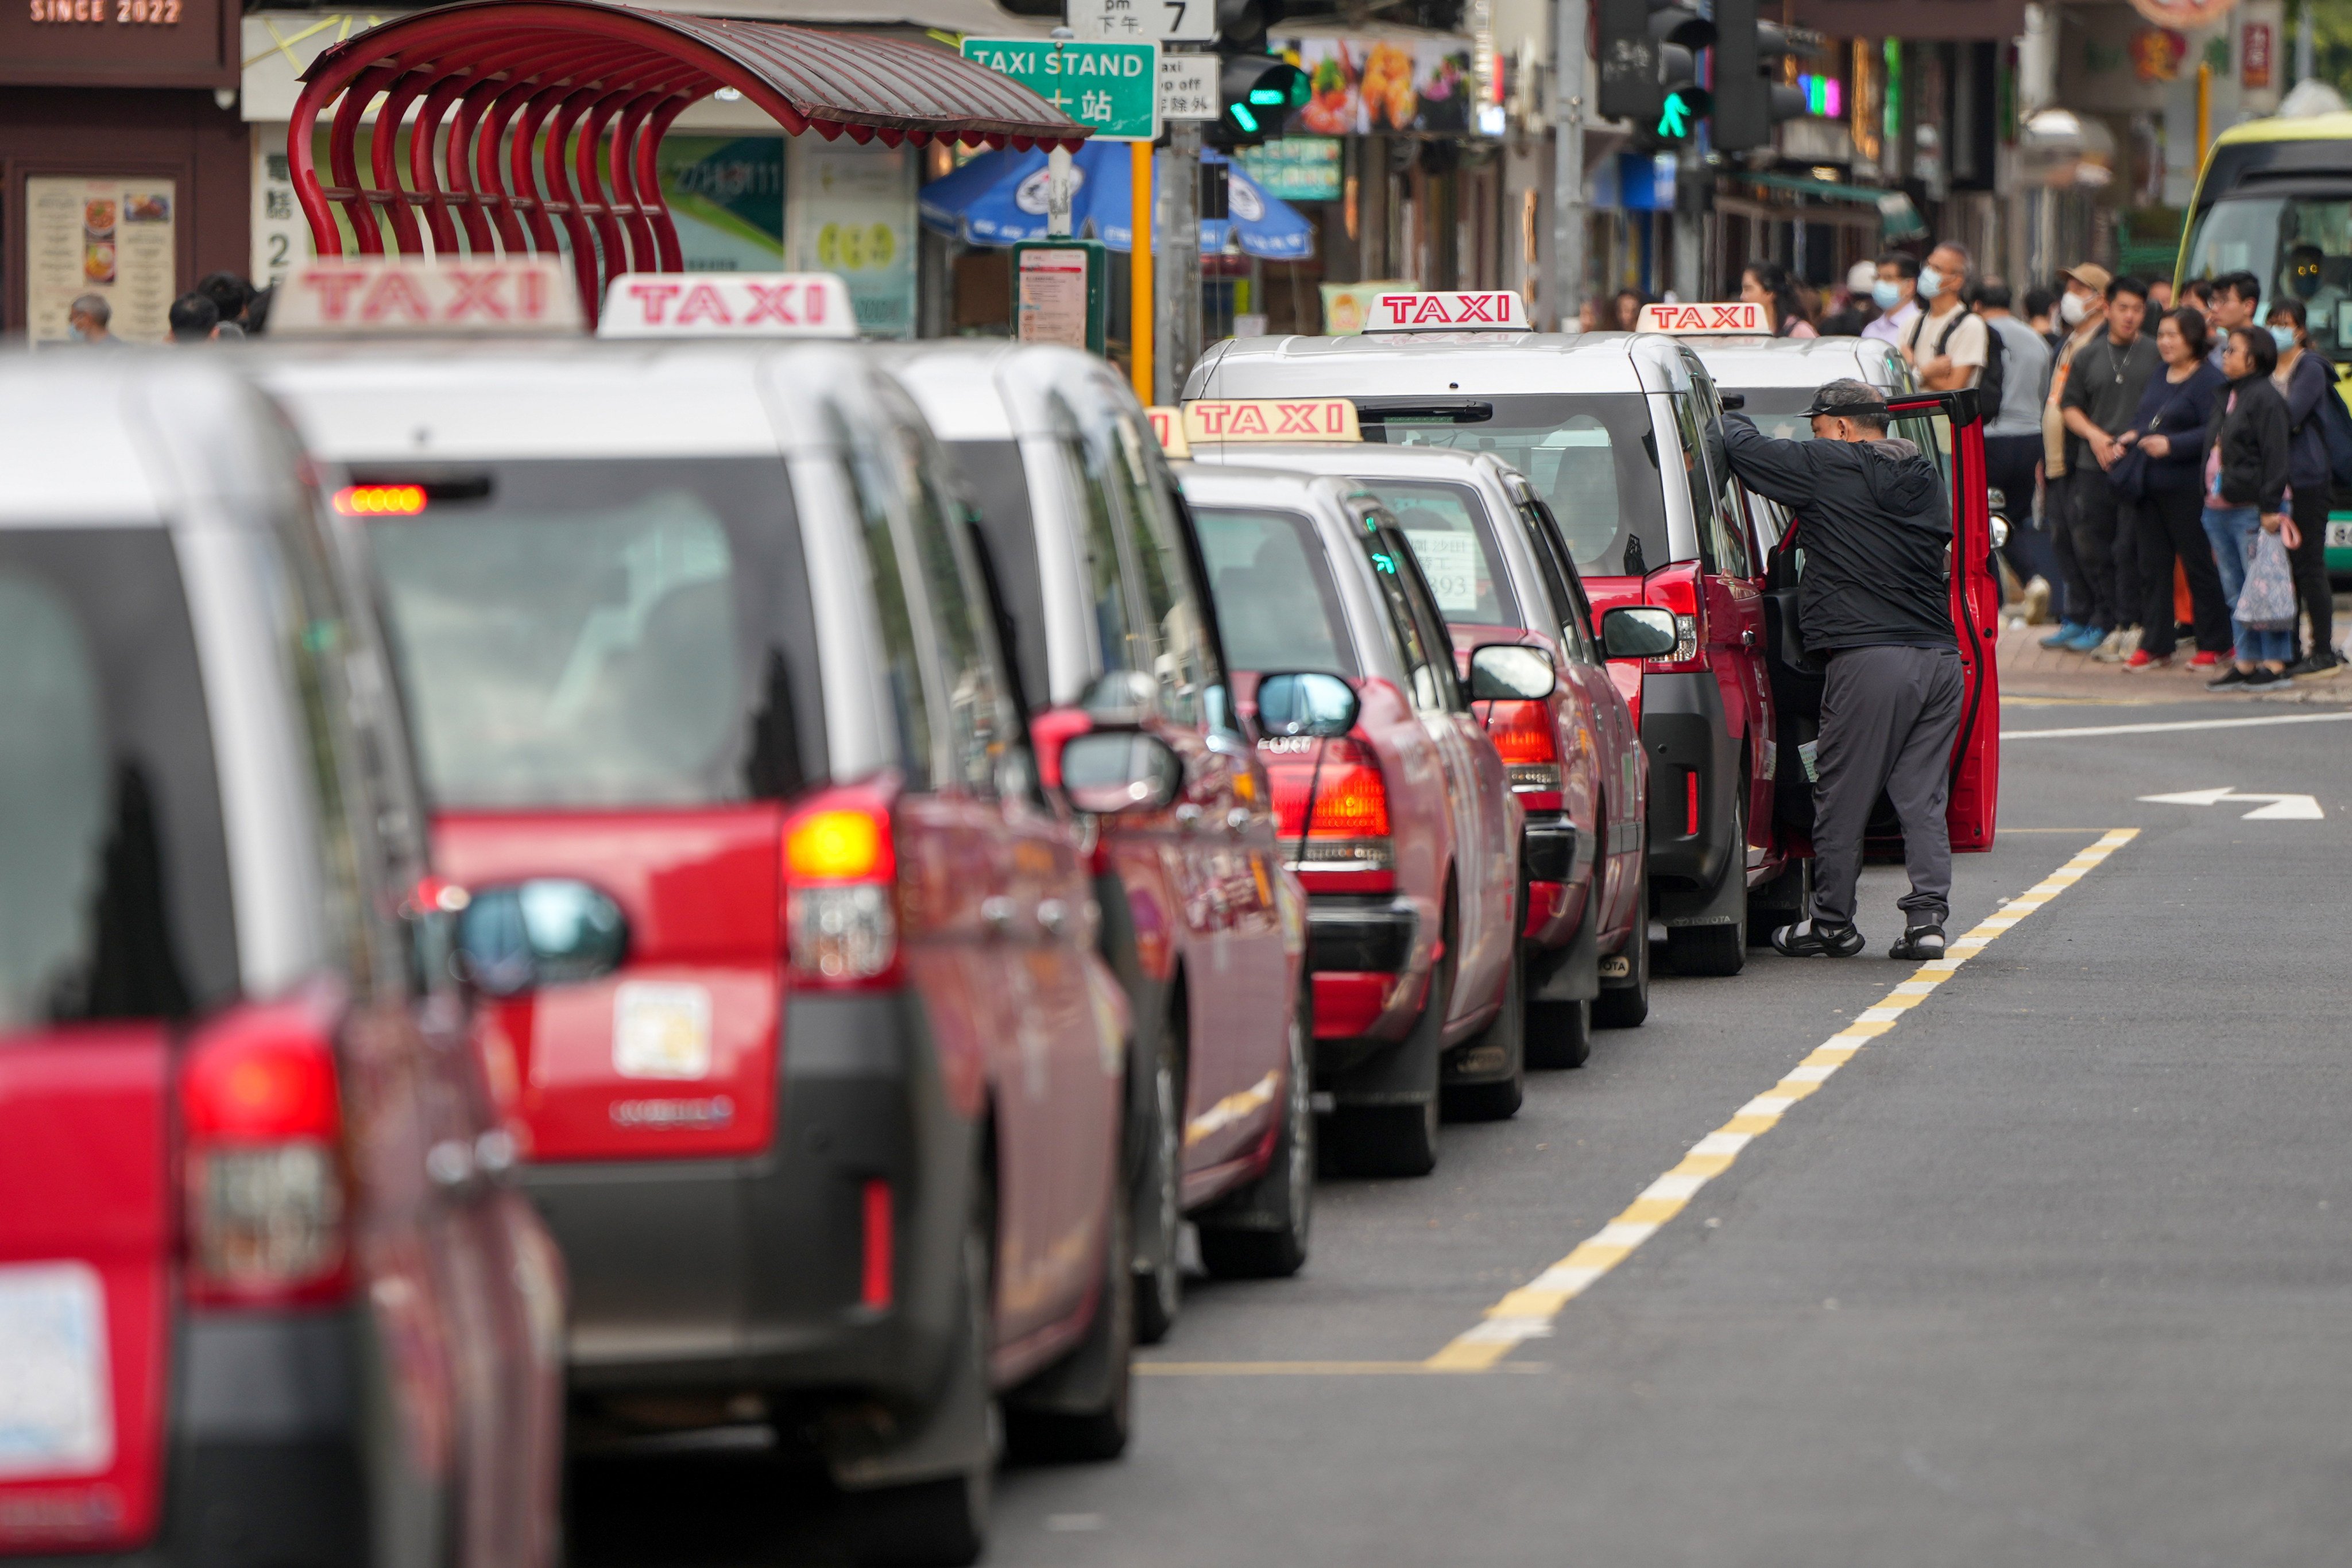 Under the system, taxi drivers will receive demerit points for 11 types of bad behaviour and face being disqualified from driving their cabs if they accumulate too many. Photo: Sam Tsang